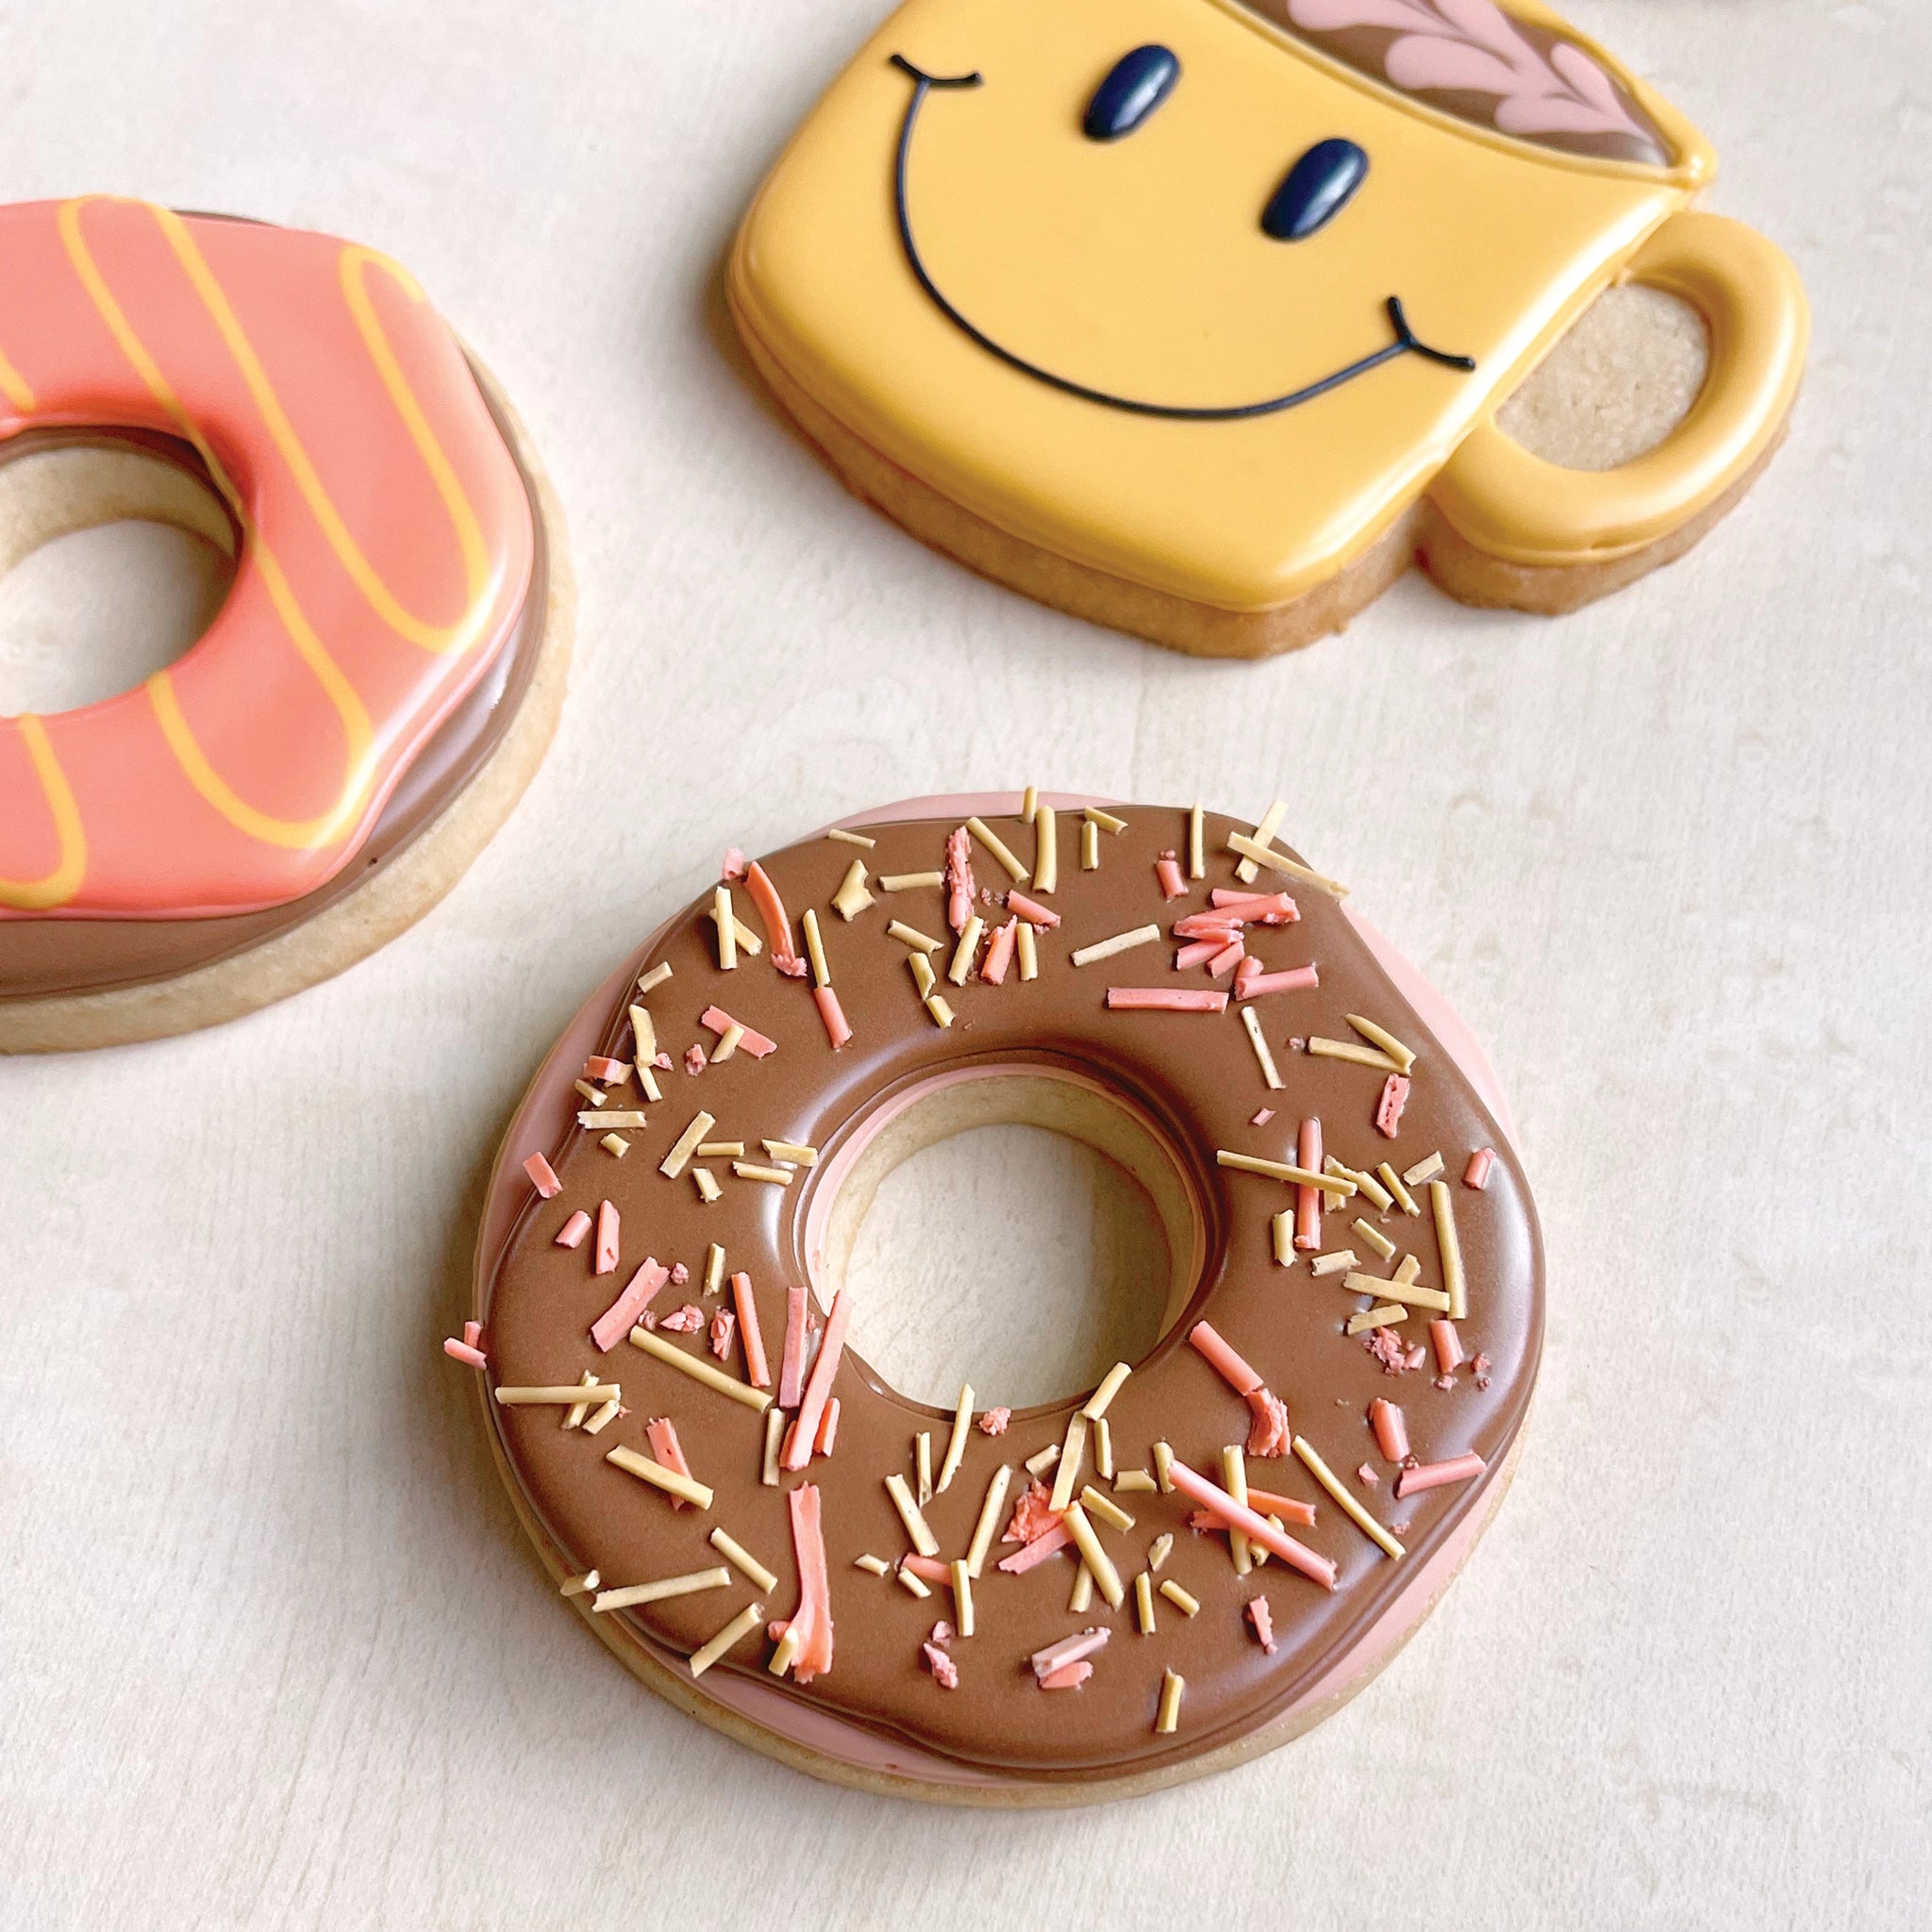 cookies decorated as donuts and coffee